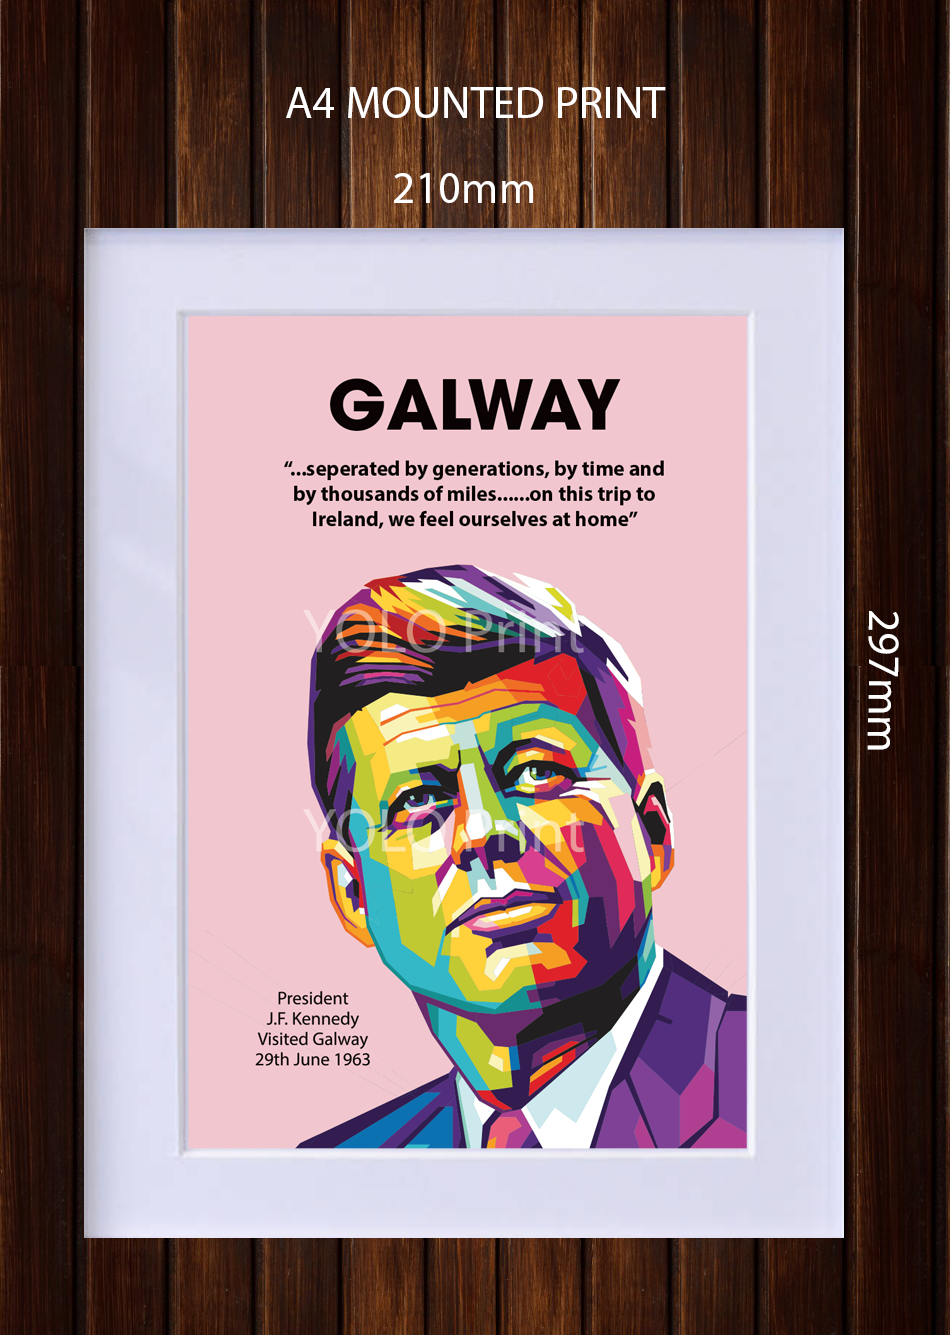 Galway Postcard or A4 Mounted Print - President Kennedy